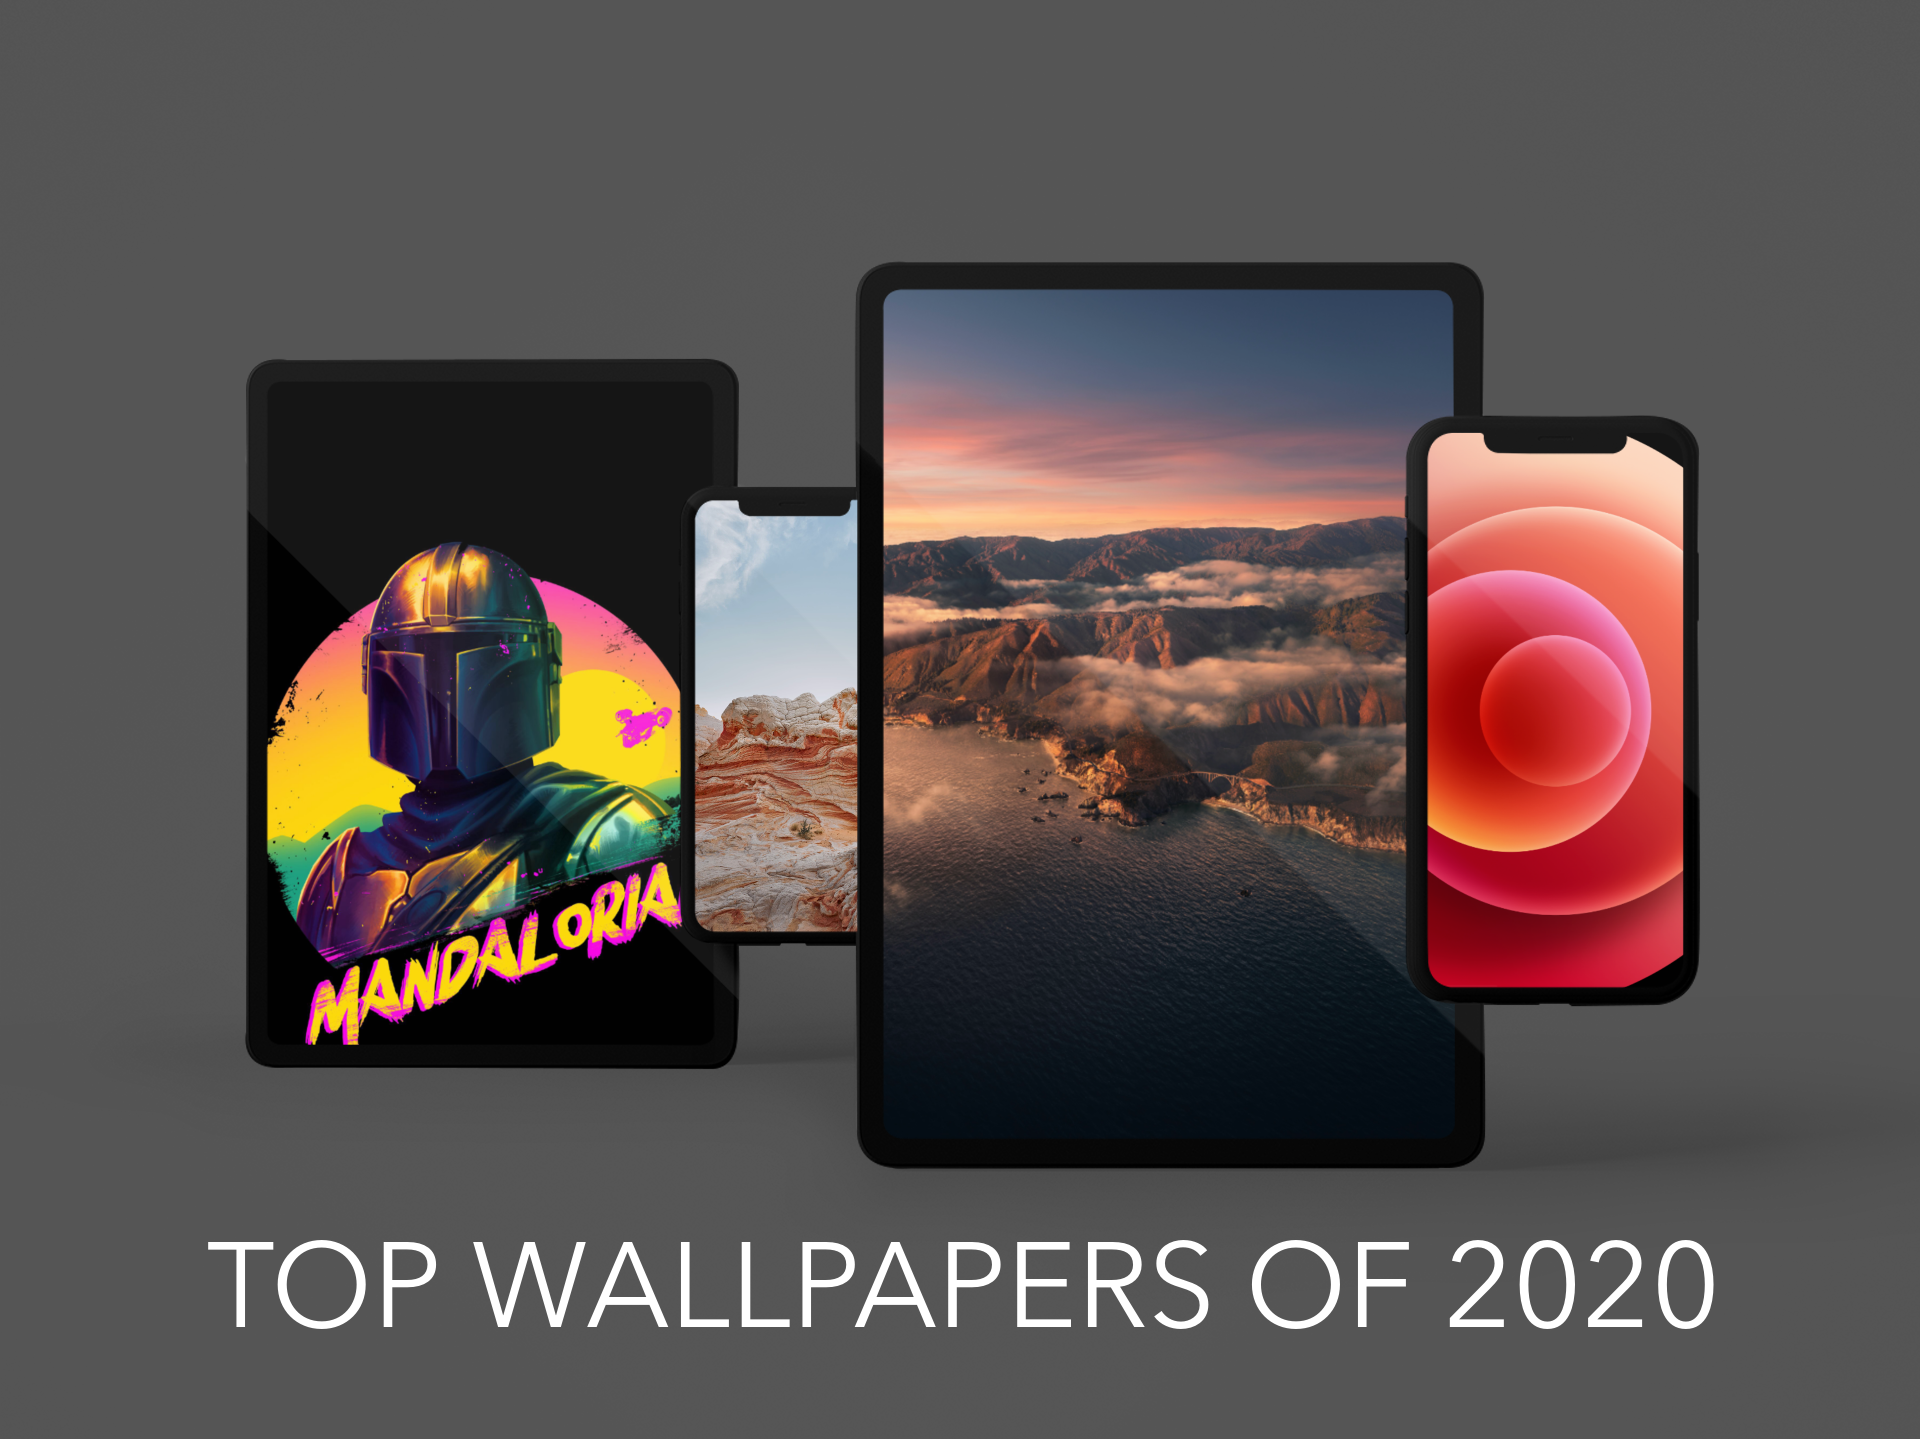 The best wallpapers of 2020 on iDB